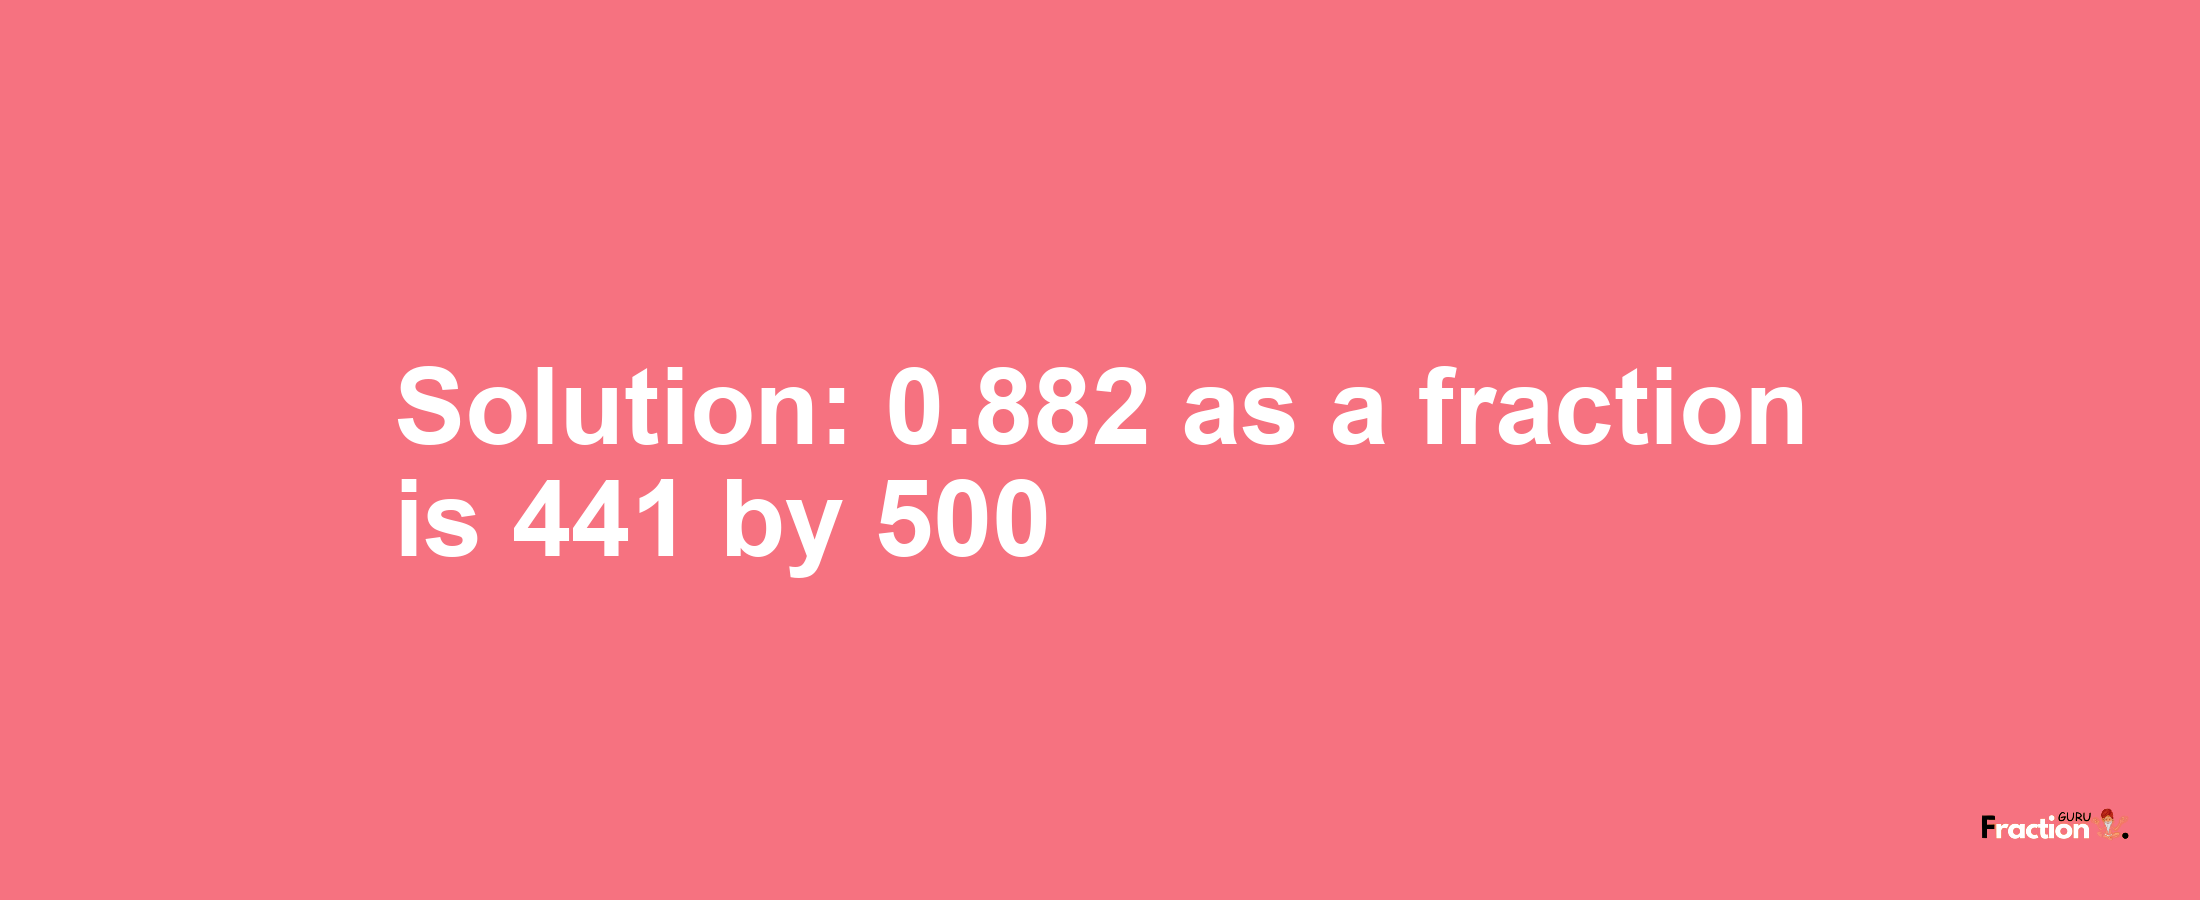 Solution:0.882 as a fraction is 441/500